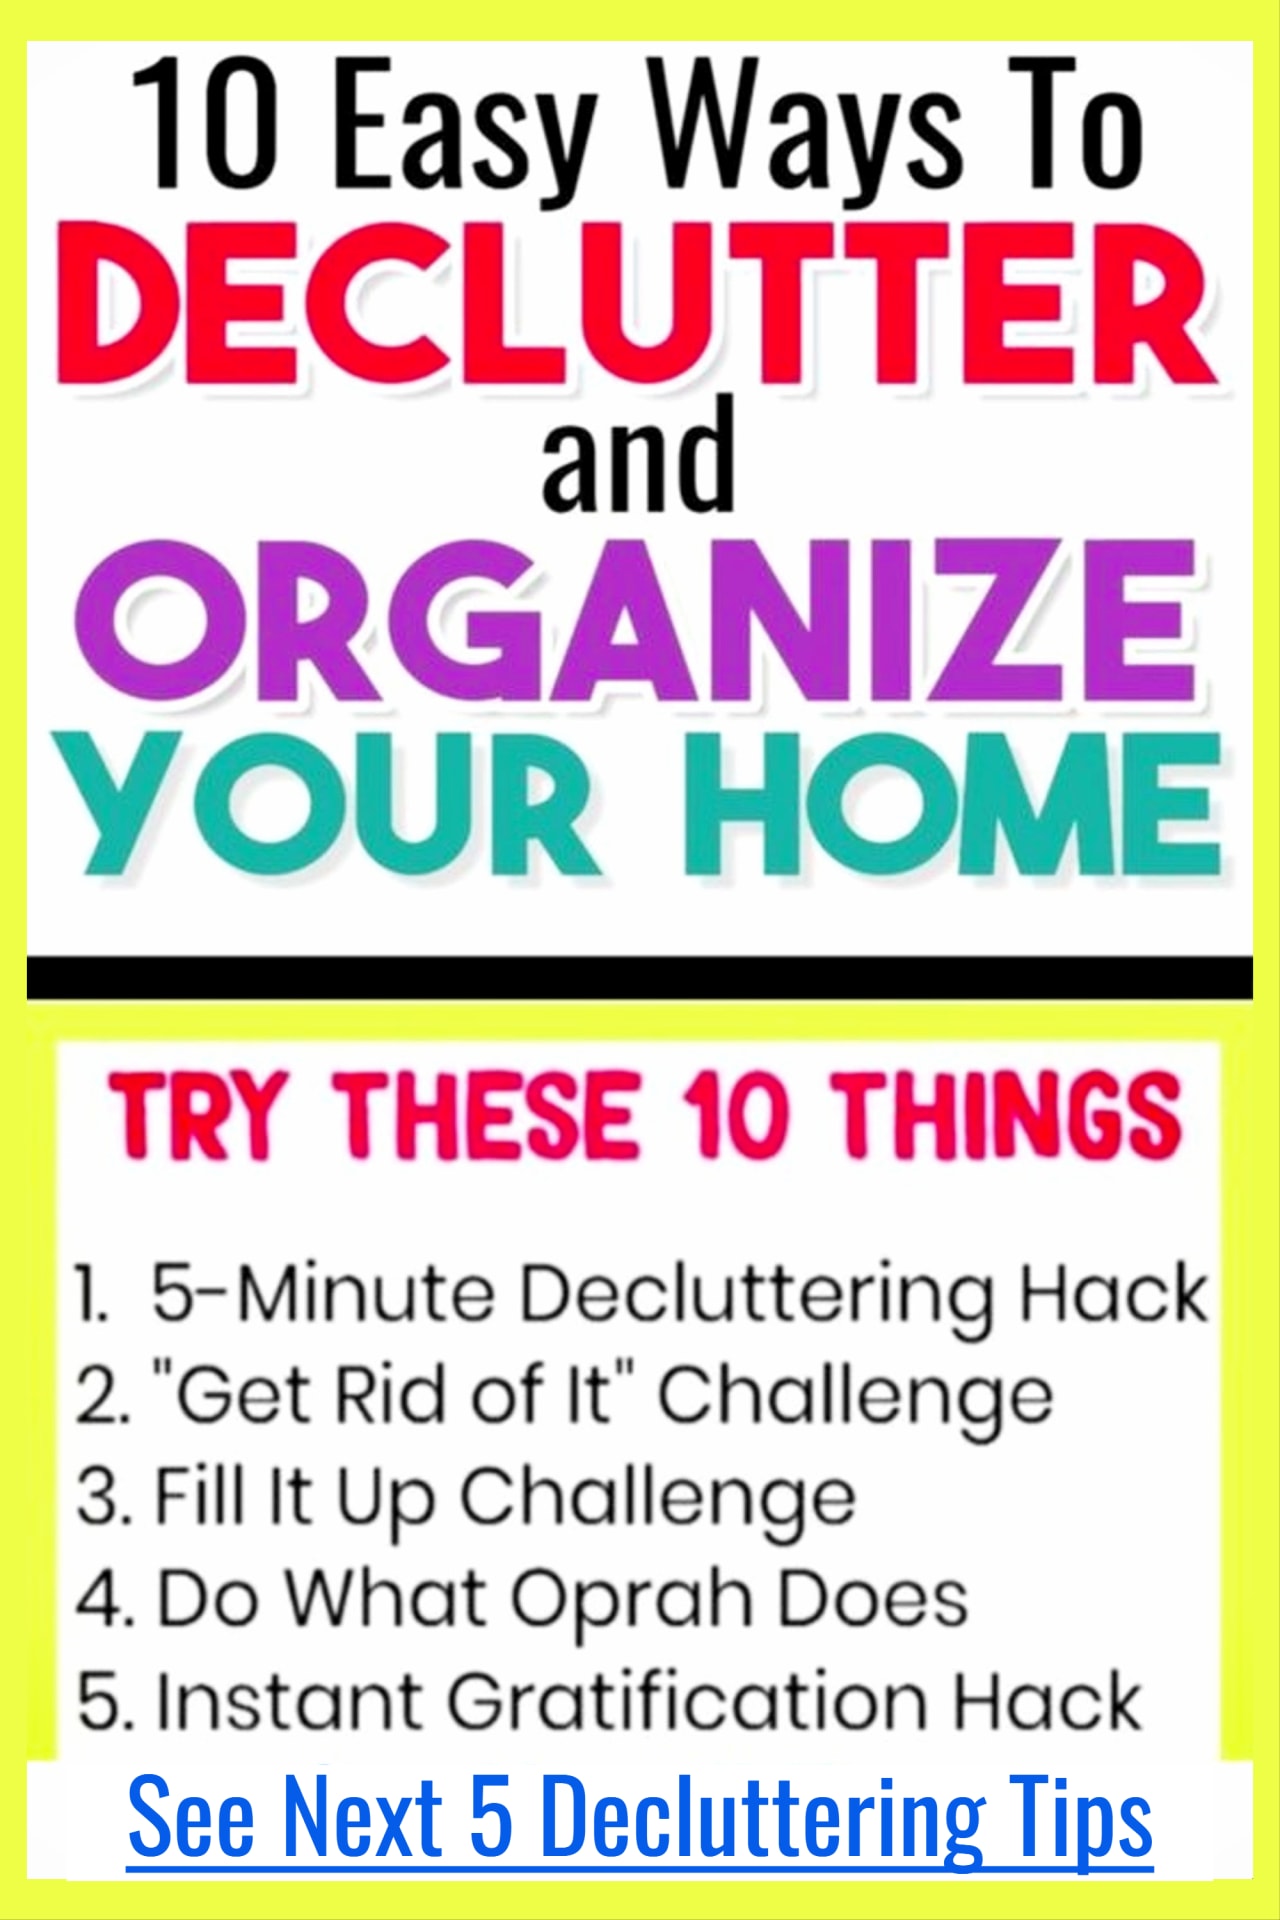 Easy decluttering tips and Organizing Ideas For The Home - Decluttering Ideas if you're feeling overwhelmed - where to start decluttering and organizing your messy house - decluttering step by step to declutter and organize without feeling overwhelmed